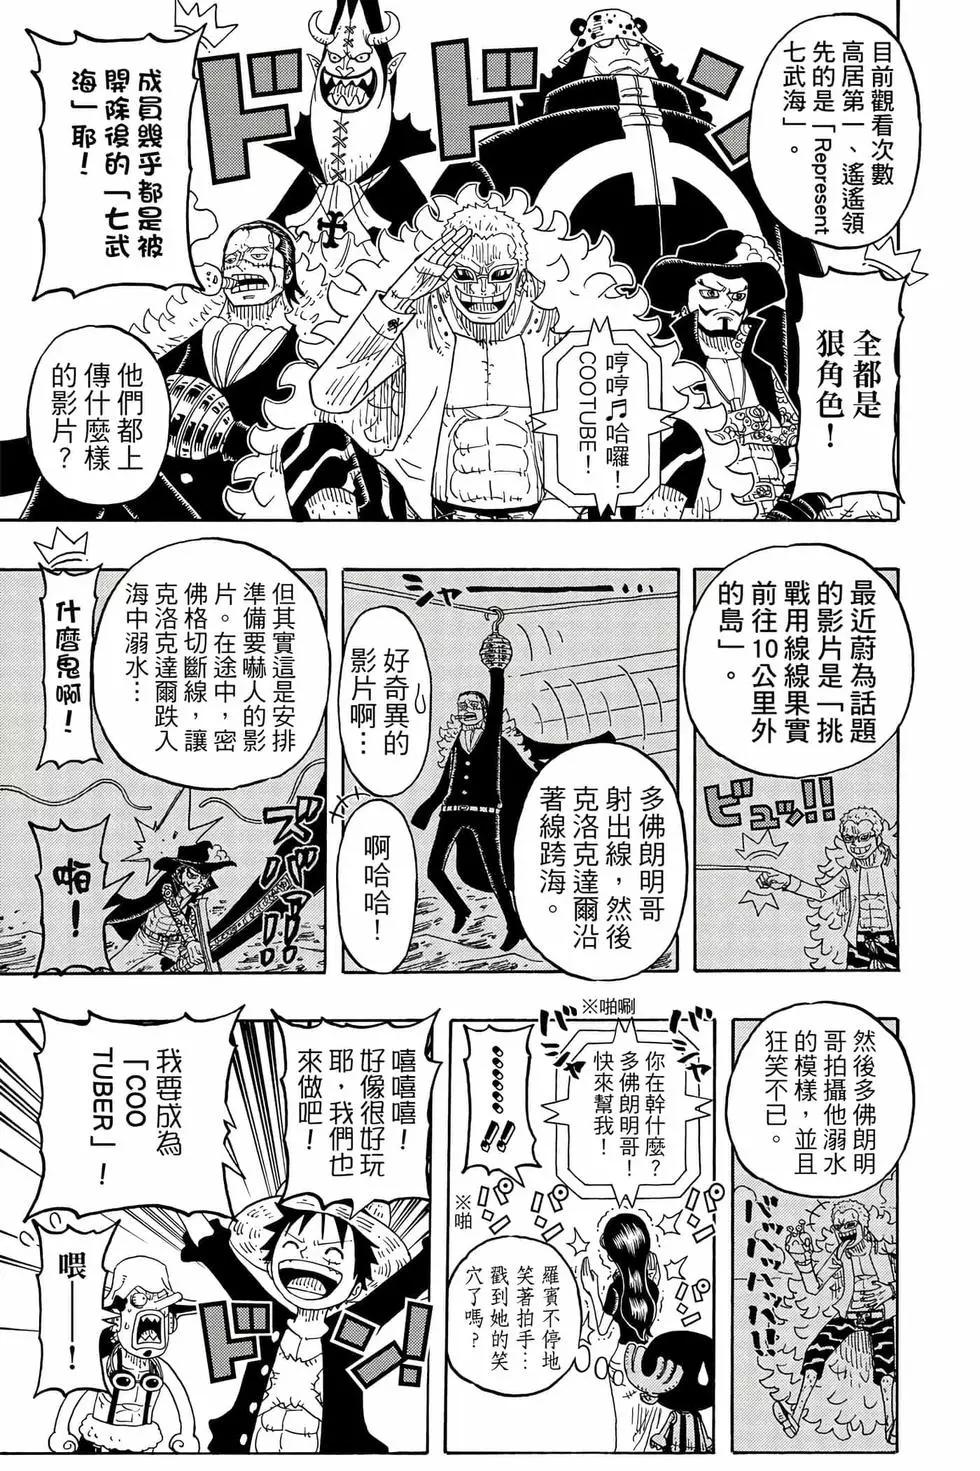 One piece party - 第05卷(1/4) - 8